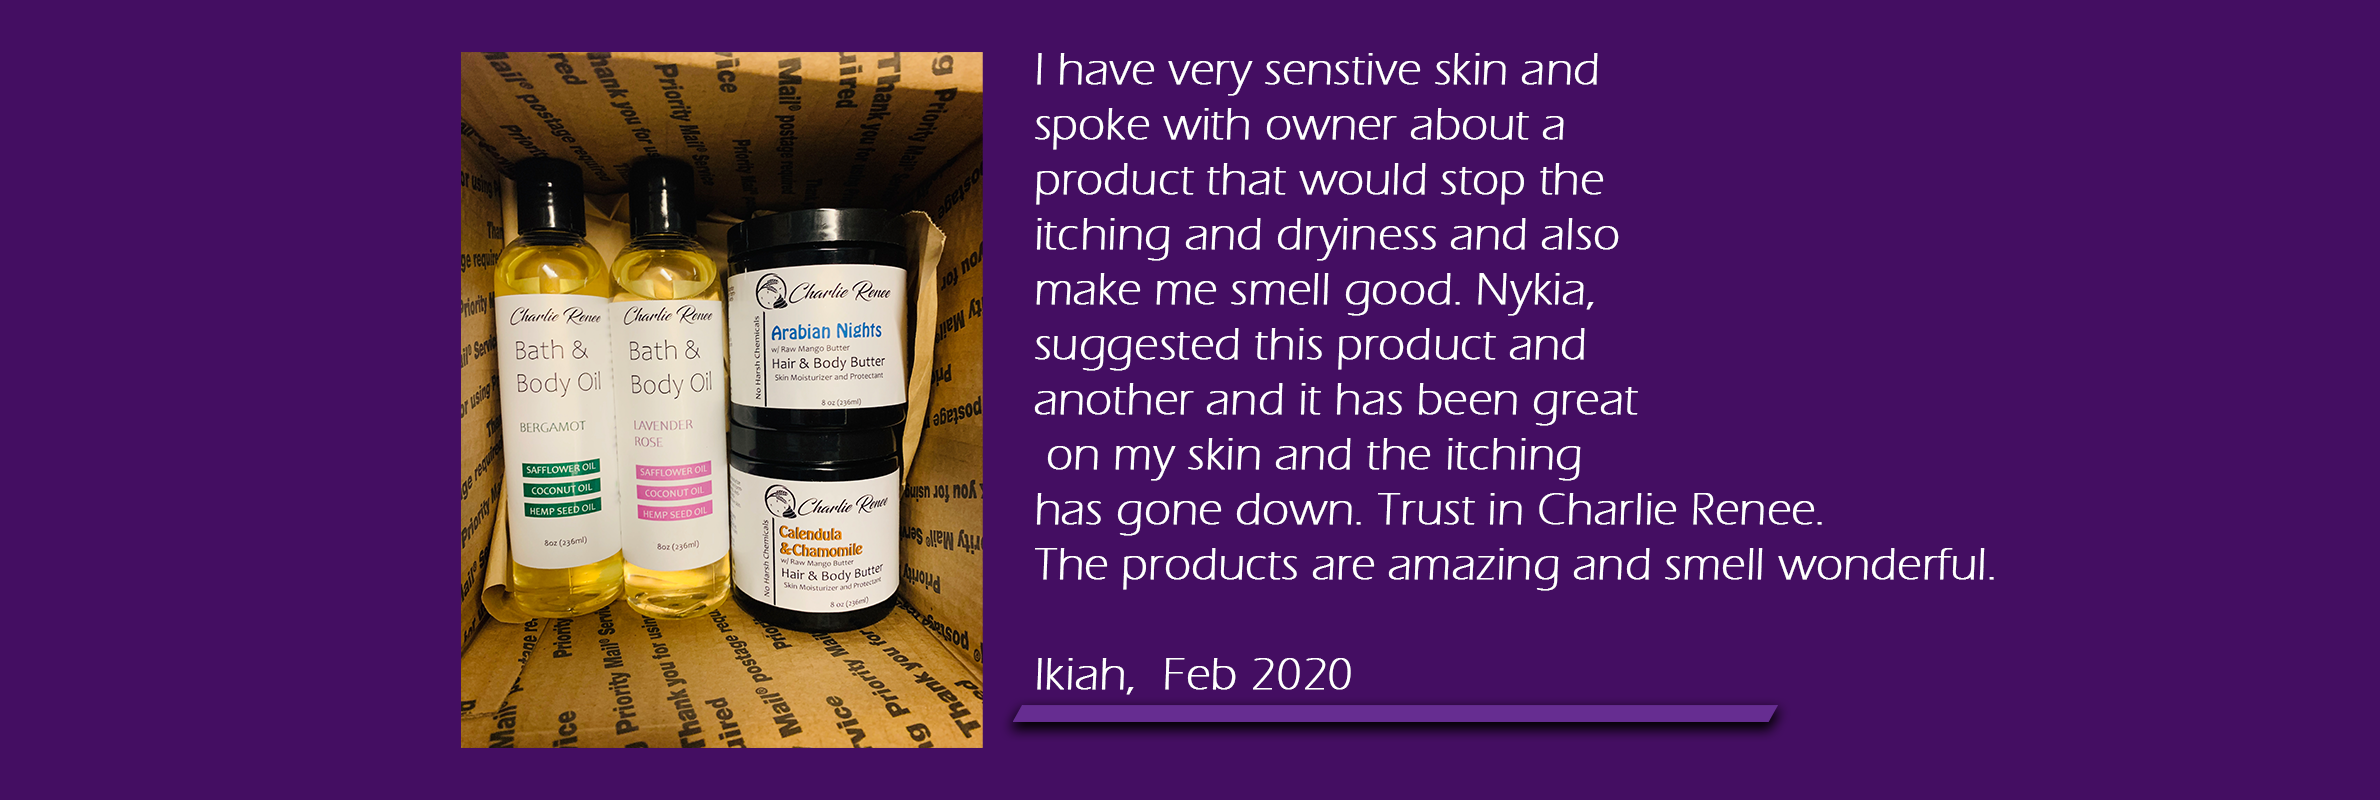 body oil review.png